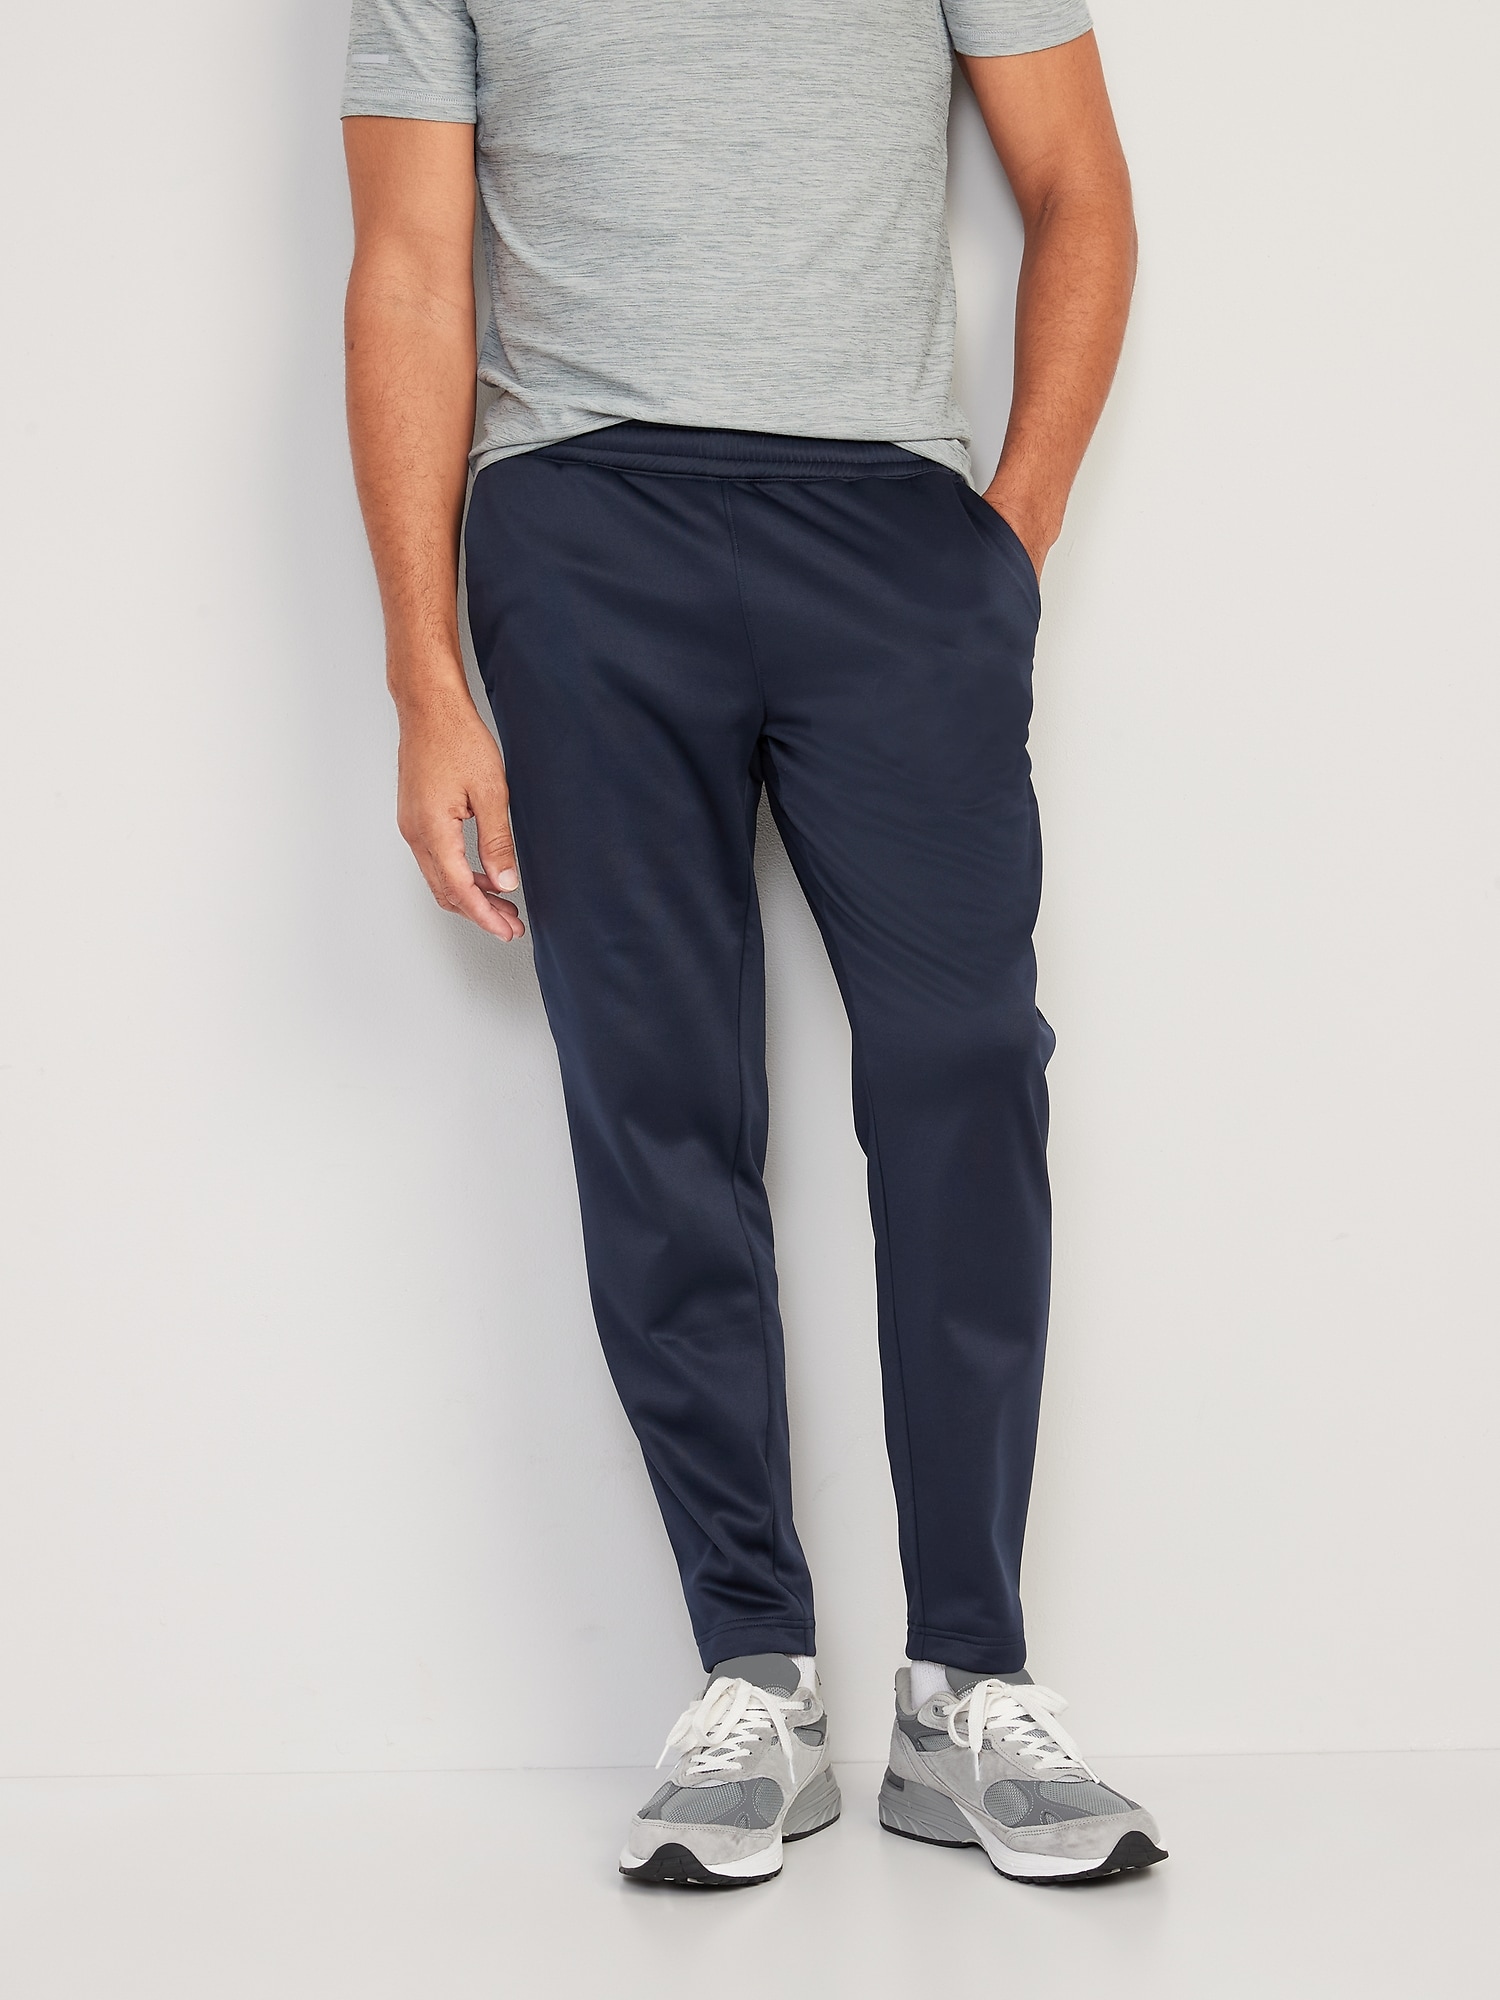 Old Navy Go-Dry Tapered Performance Sweatpants for Men blue. 1